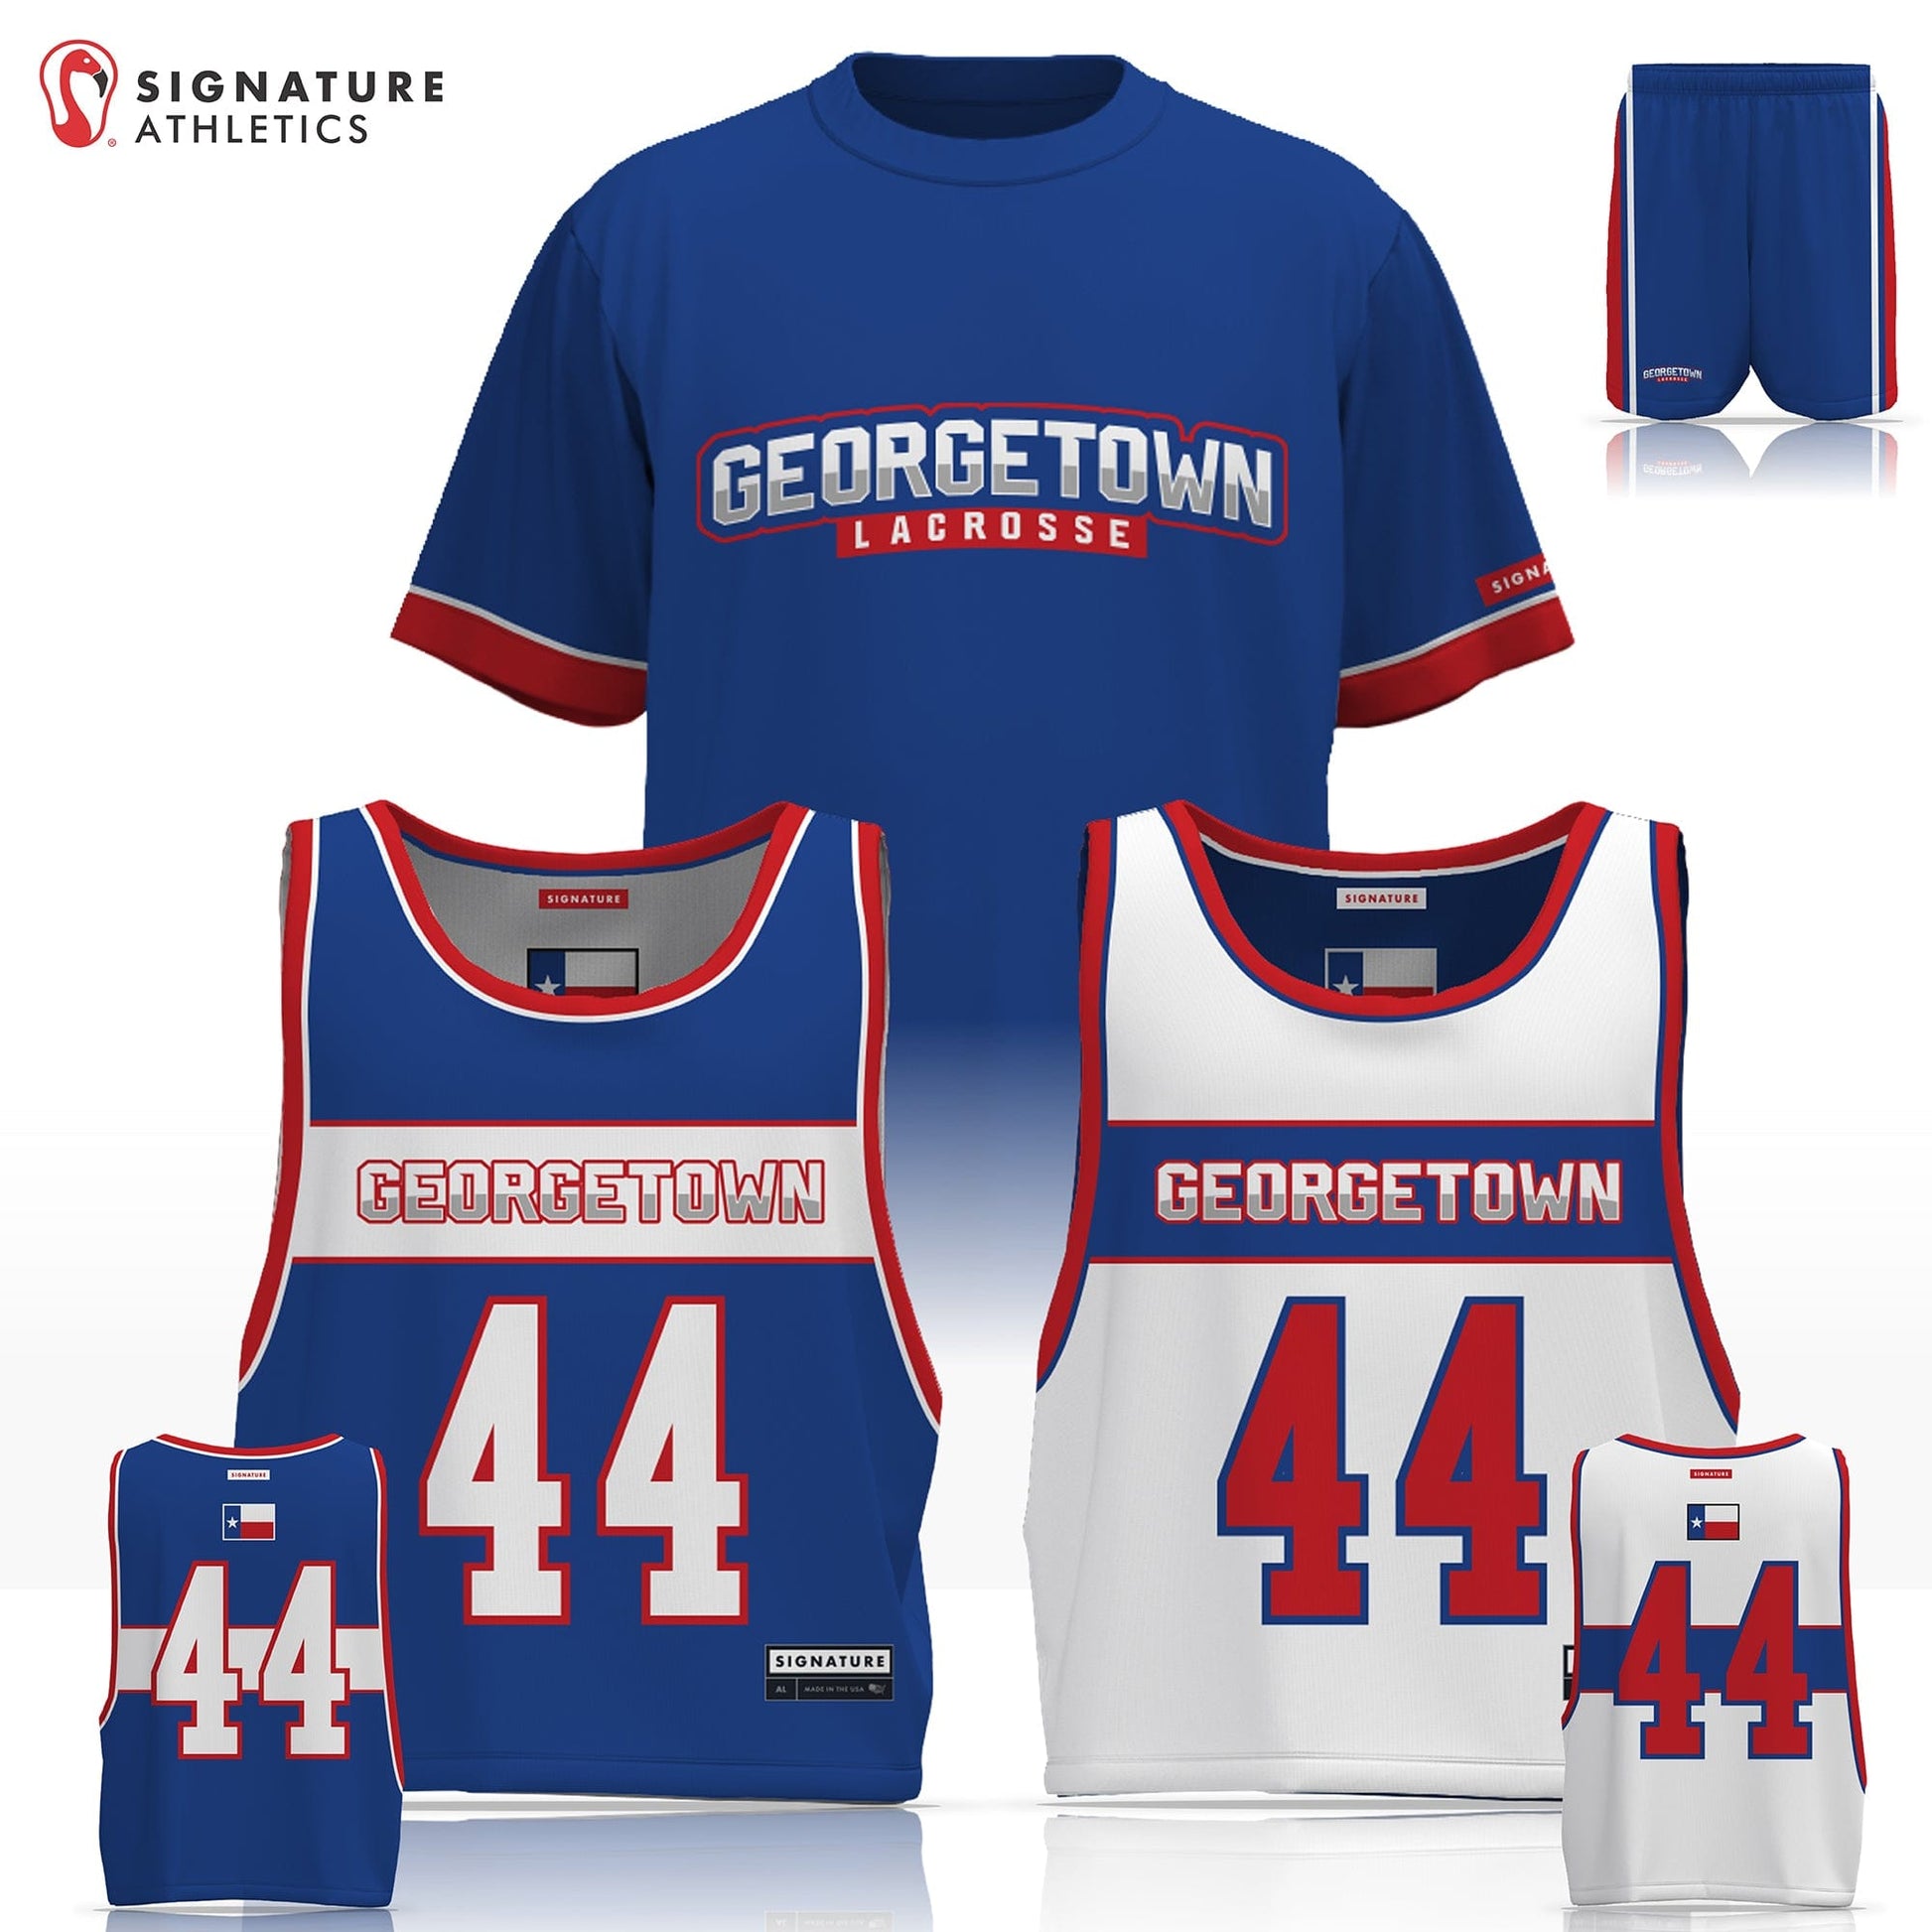 Georgetown Youth Lacrosse Men's 3 Piece Player Game Package: 1st/2nd (Bantam) Signature Lacrosse